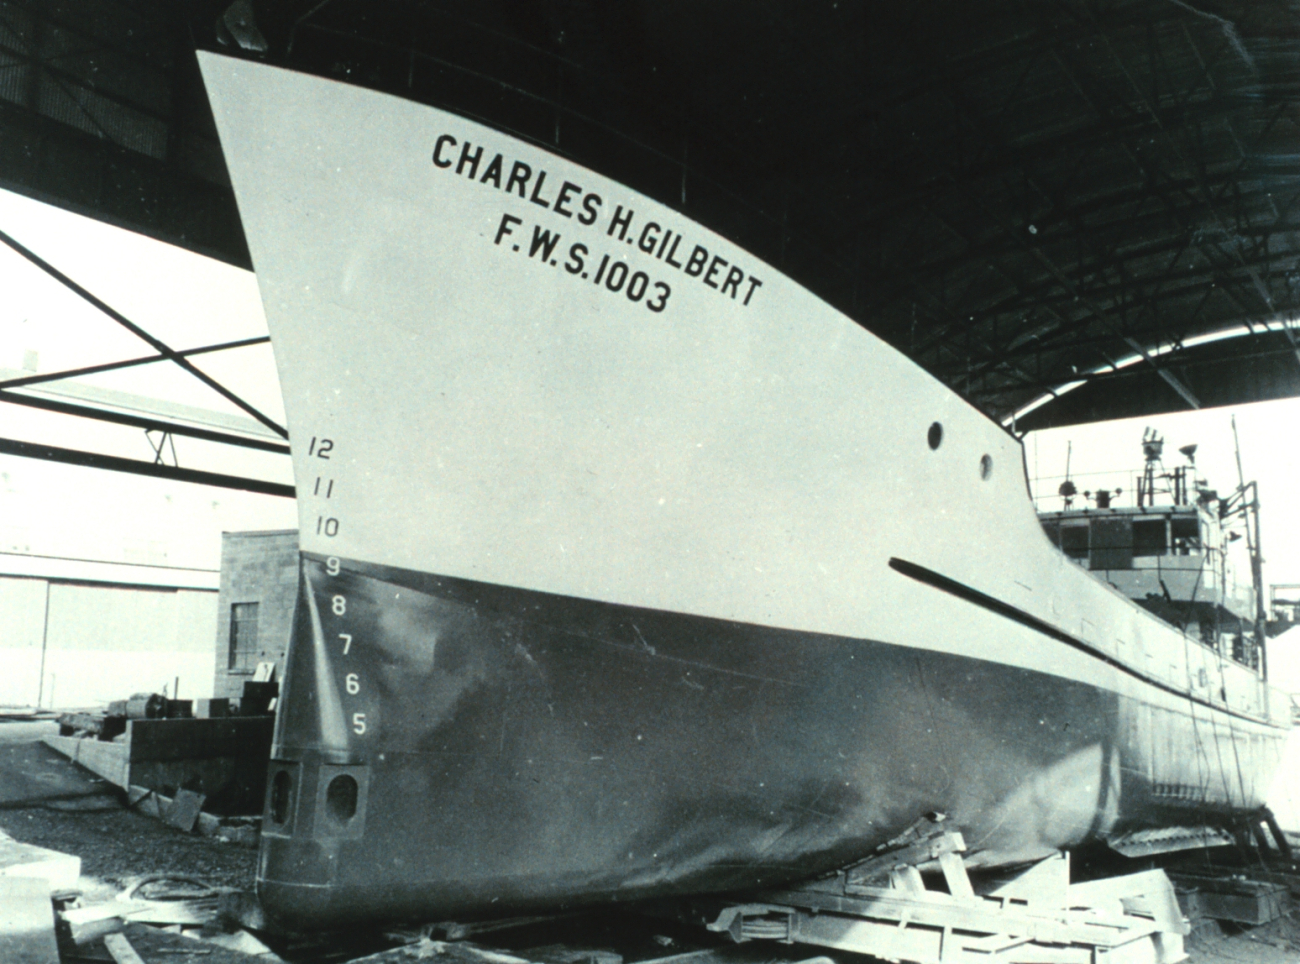 Construction of the bow viewing chamber on the Fish and Wildlife Service ShipCHARLES H